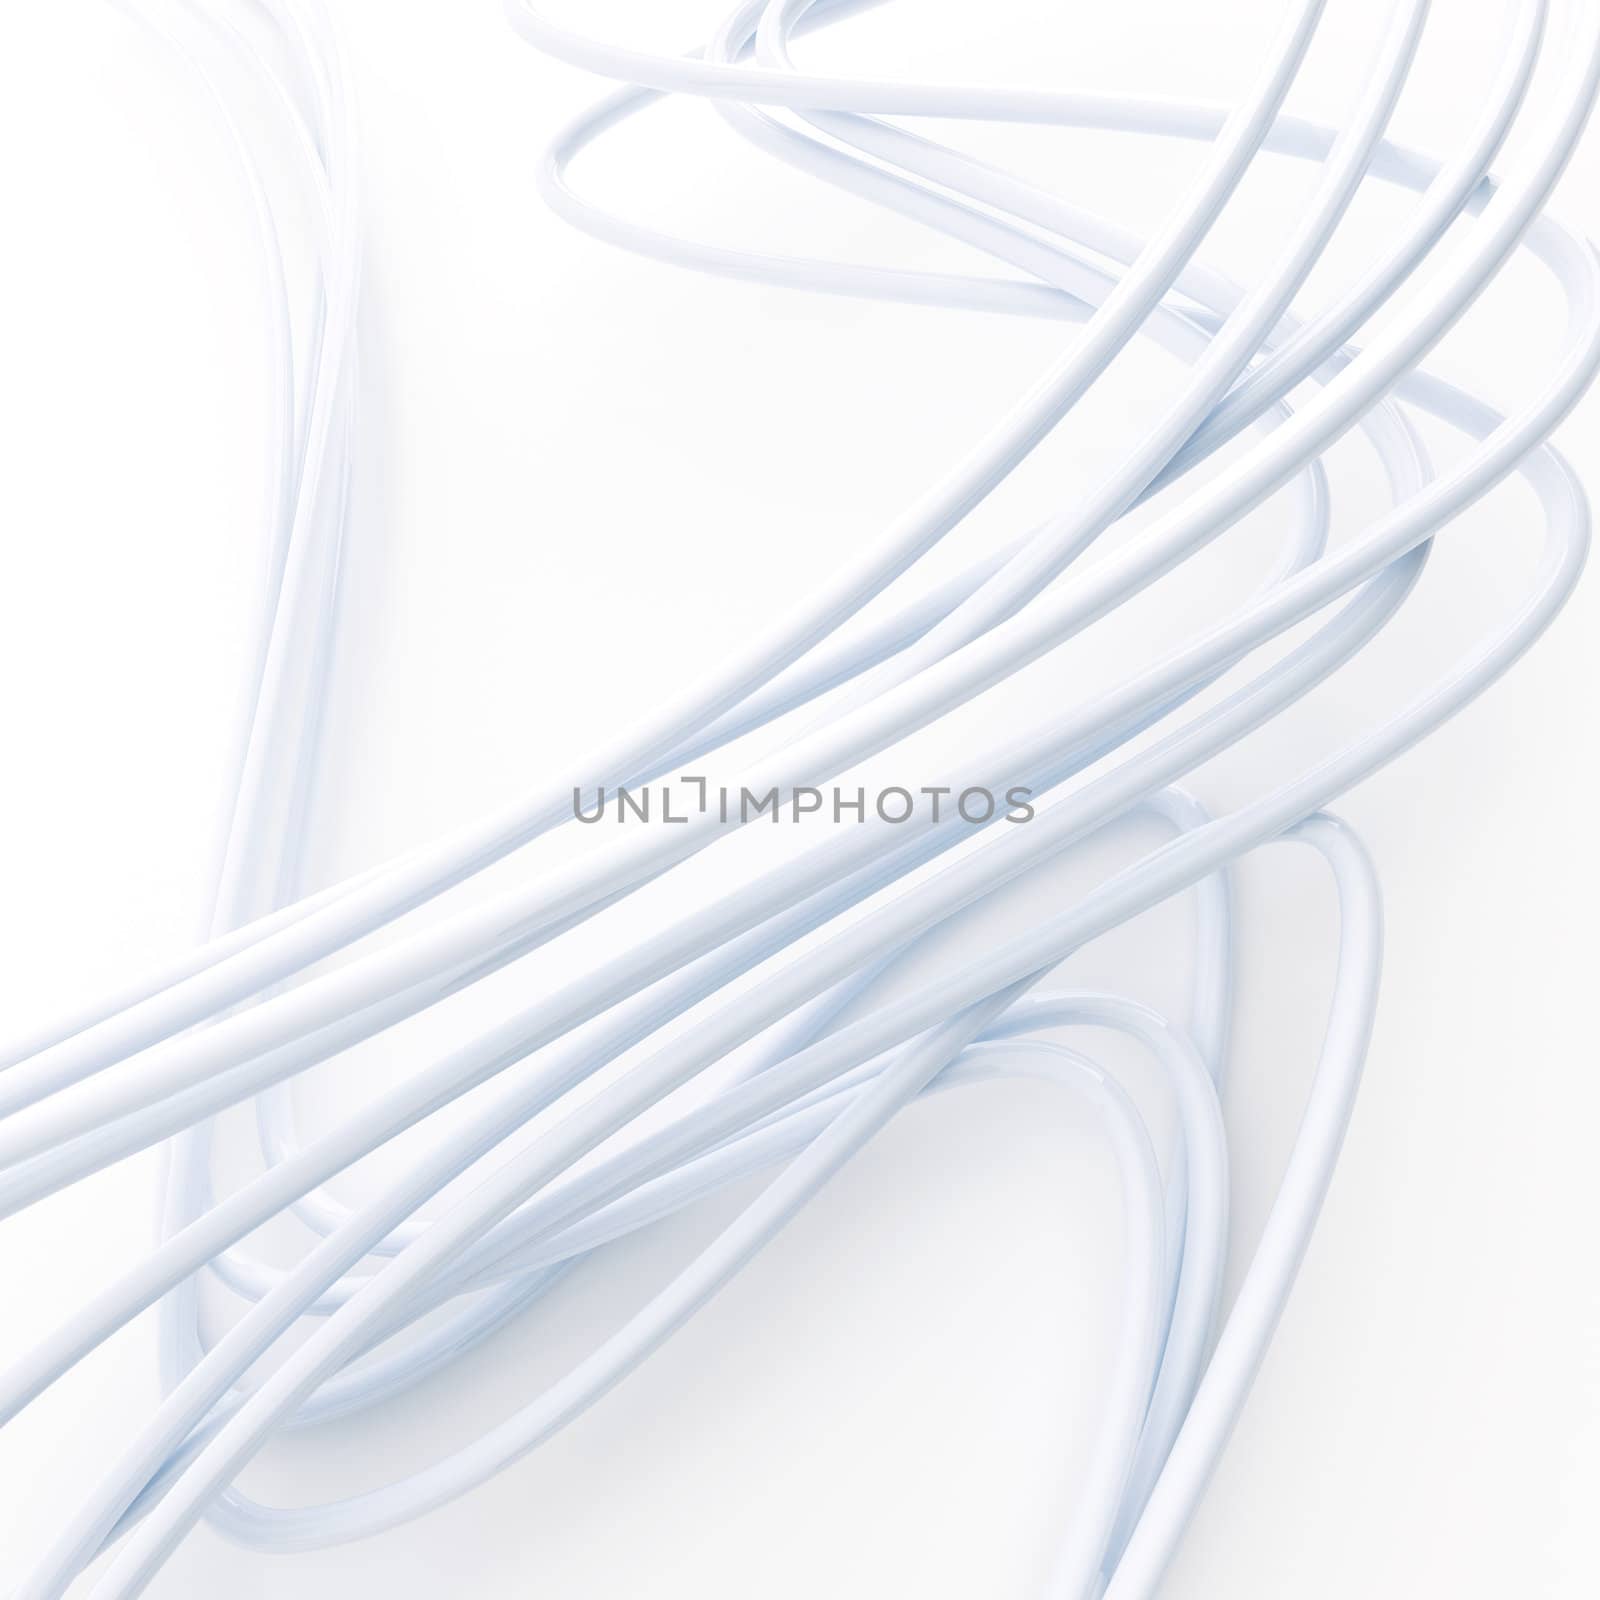 bright fibre-optical cables on a white background